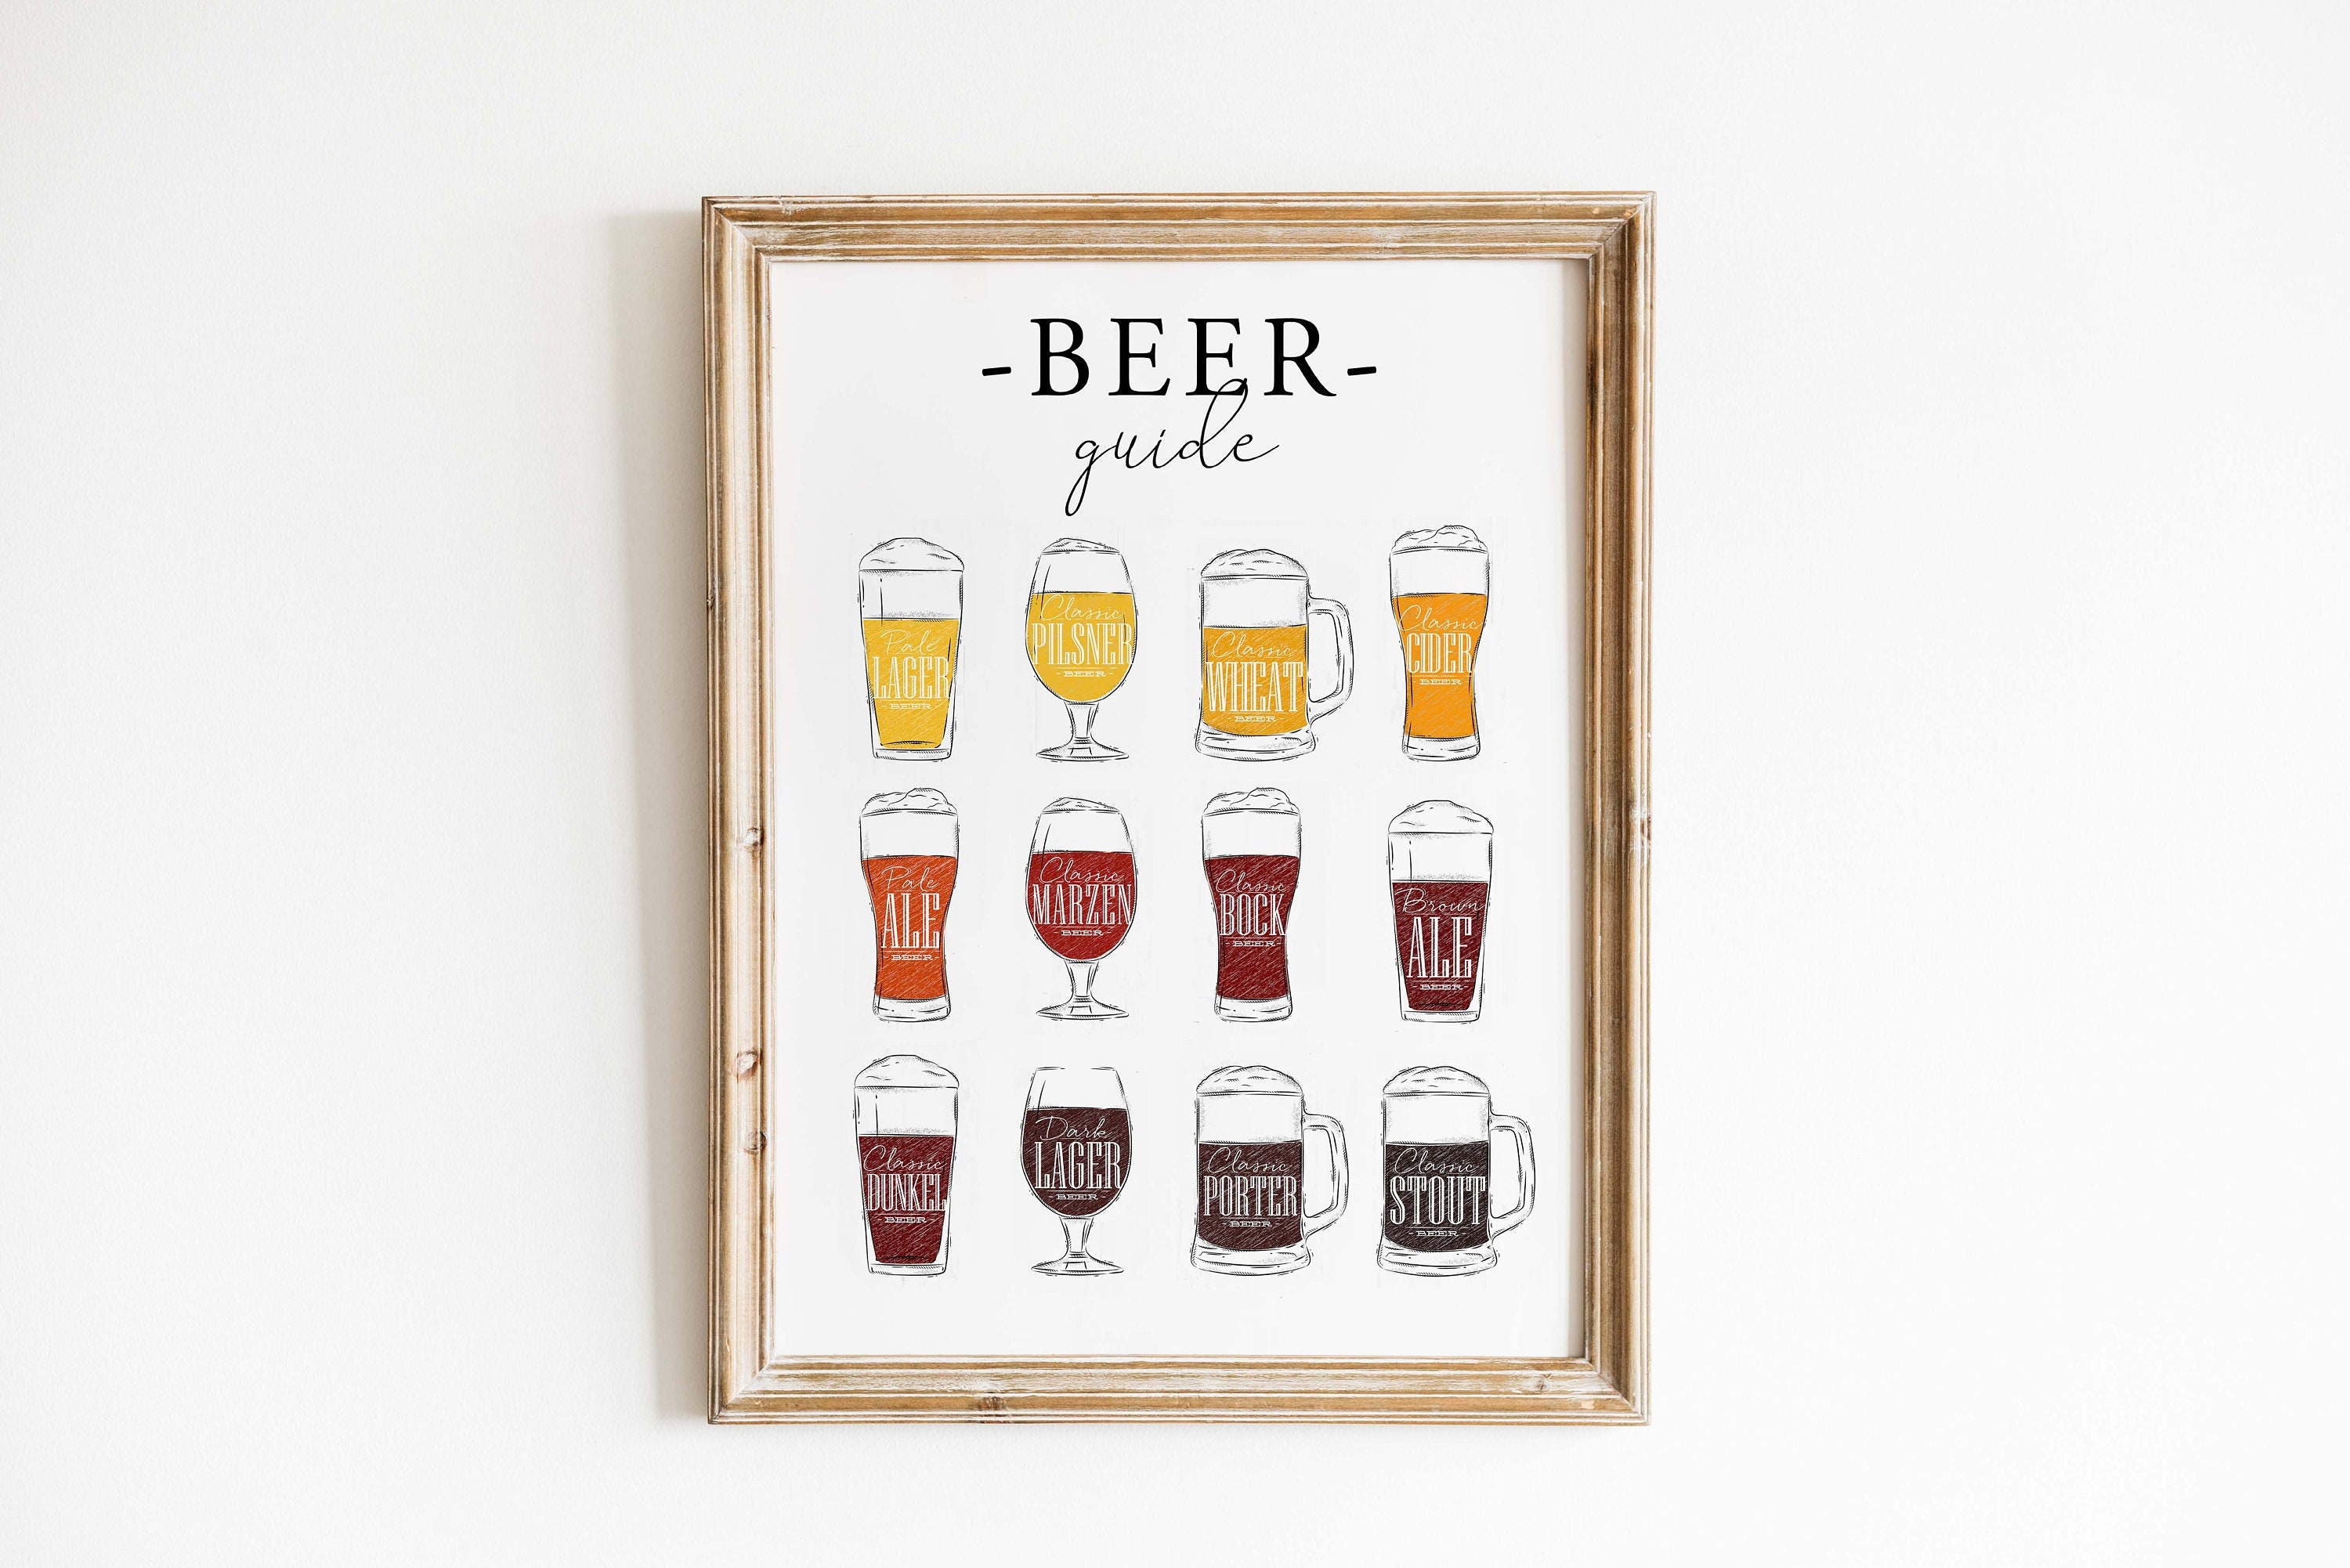 Types of Beer Glasses and Styles of Beer Reference Guide Chart Home Bar  Decor Pub Decor IPA Beer Mug Pint Glass Beer Sign Porter Stout Ale Beer  Stein Brewing Cool Wall Decor